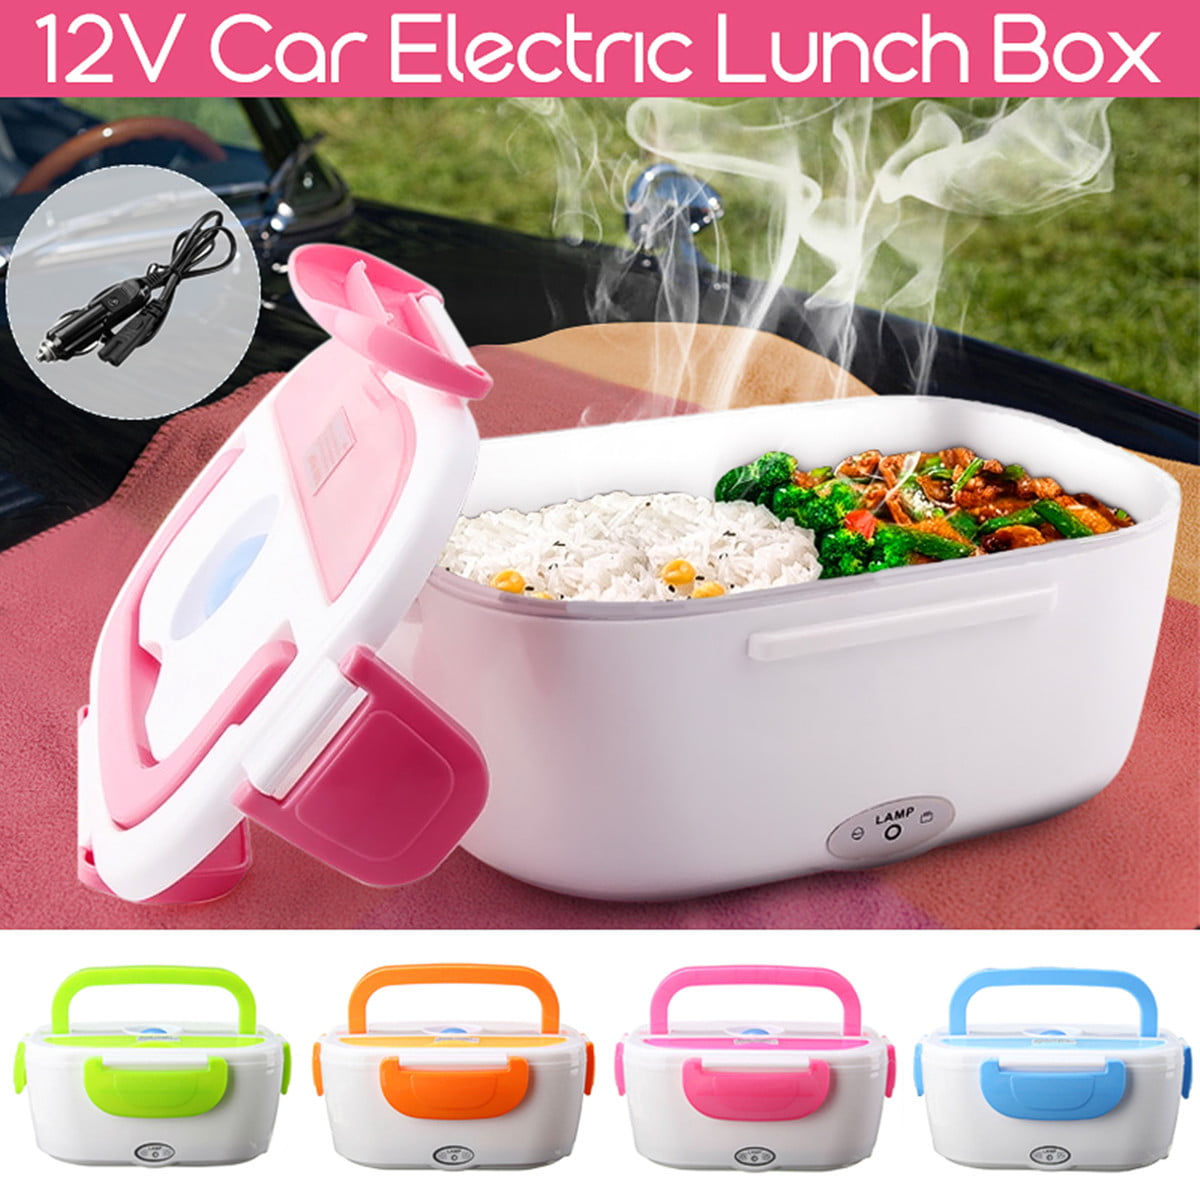 Electric Lunch Box Portable Food Grade Heating Lunchbox Container Food Warmer 2